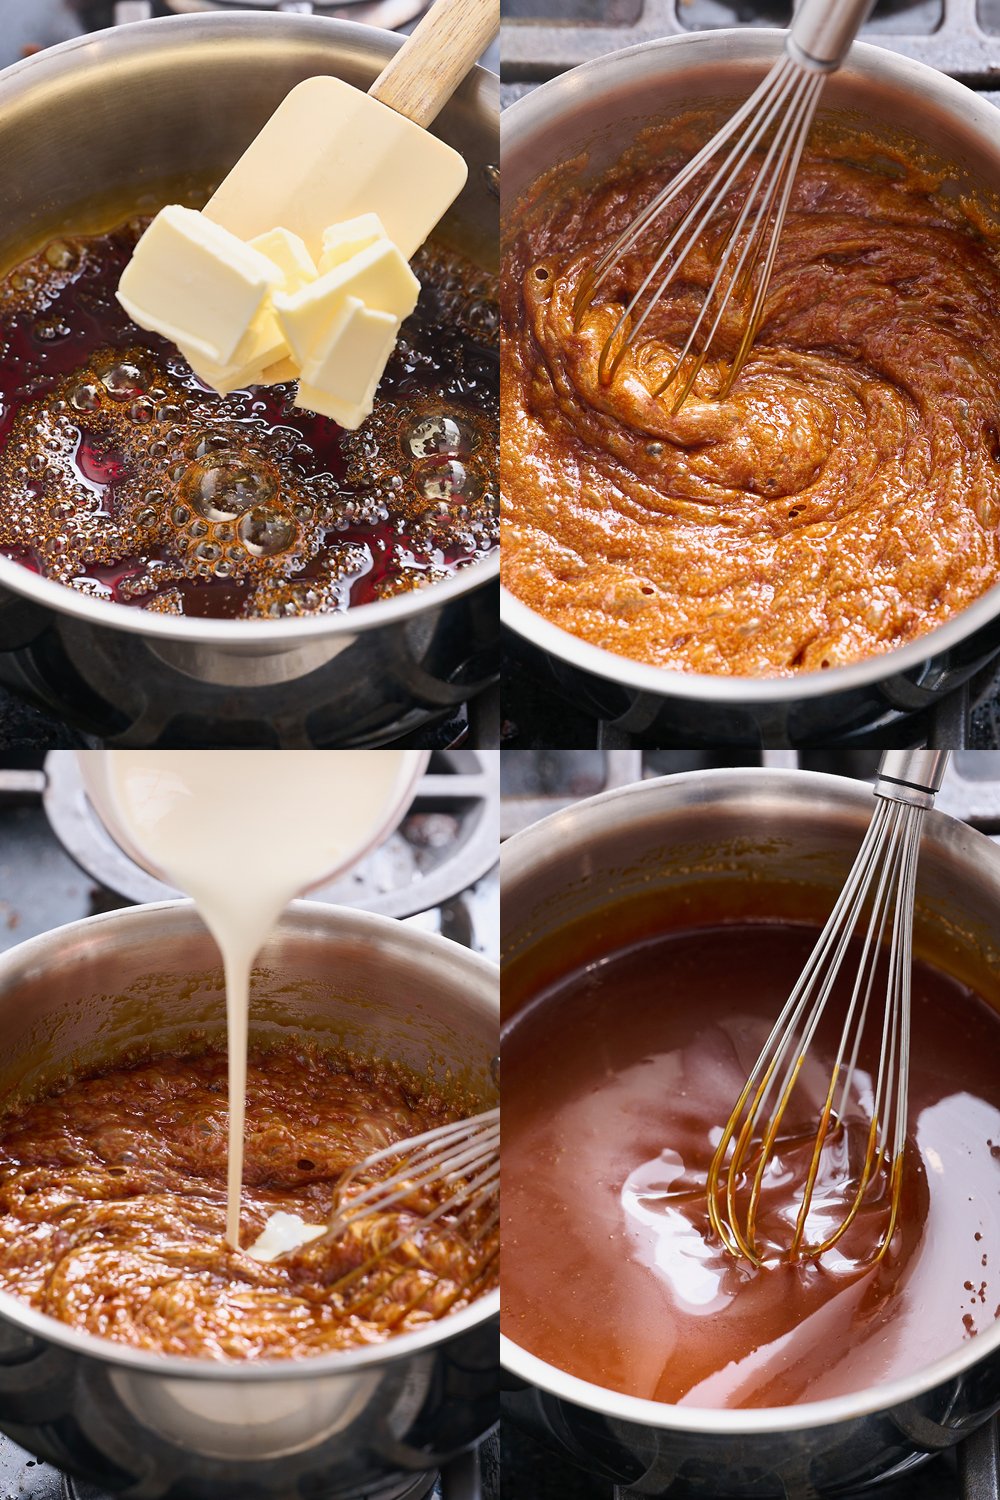 step-by-step process shots of butter being added, then heavy cream being added, to make the caramel.